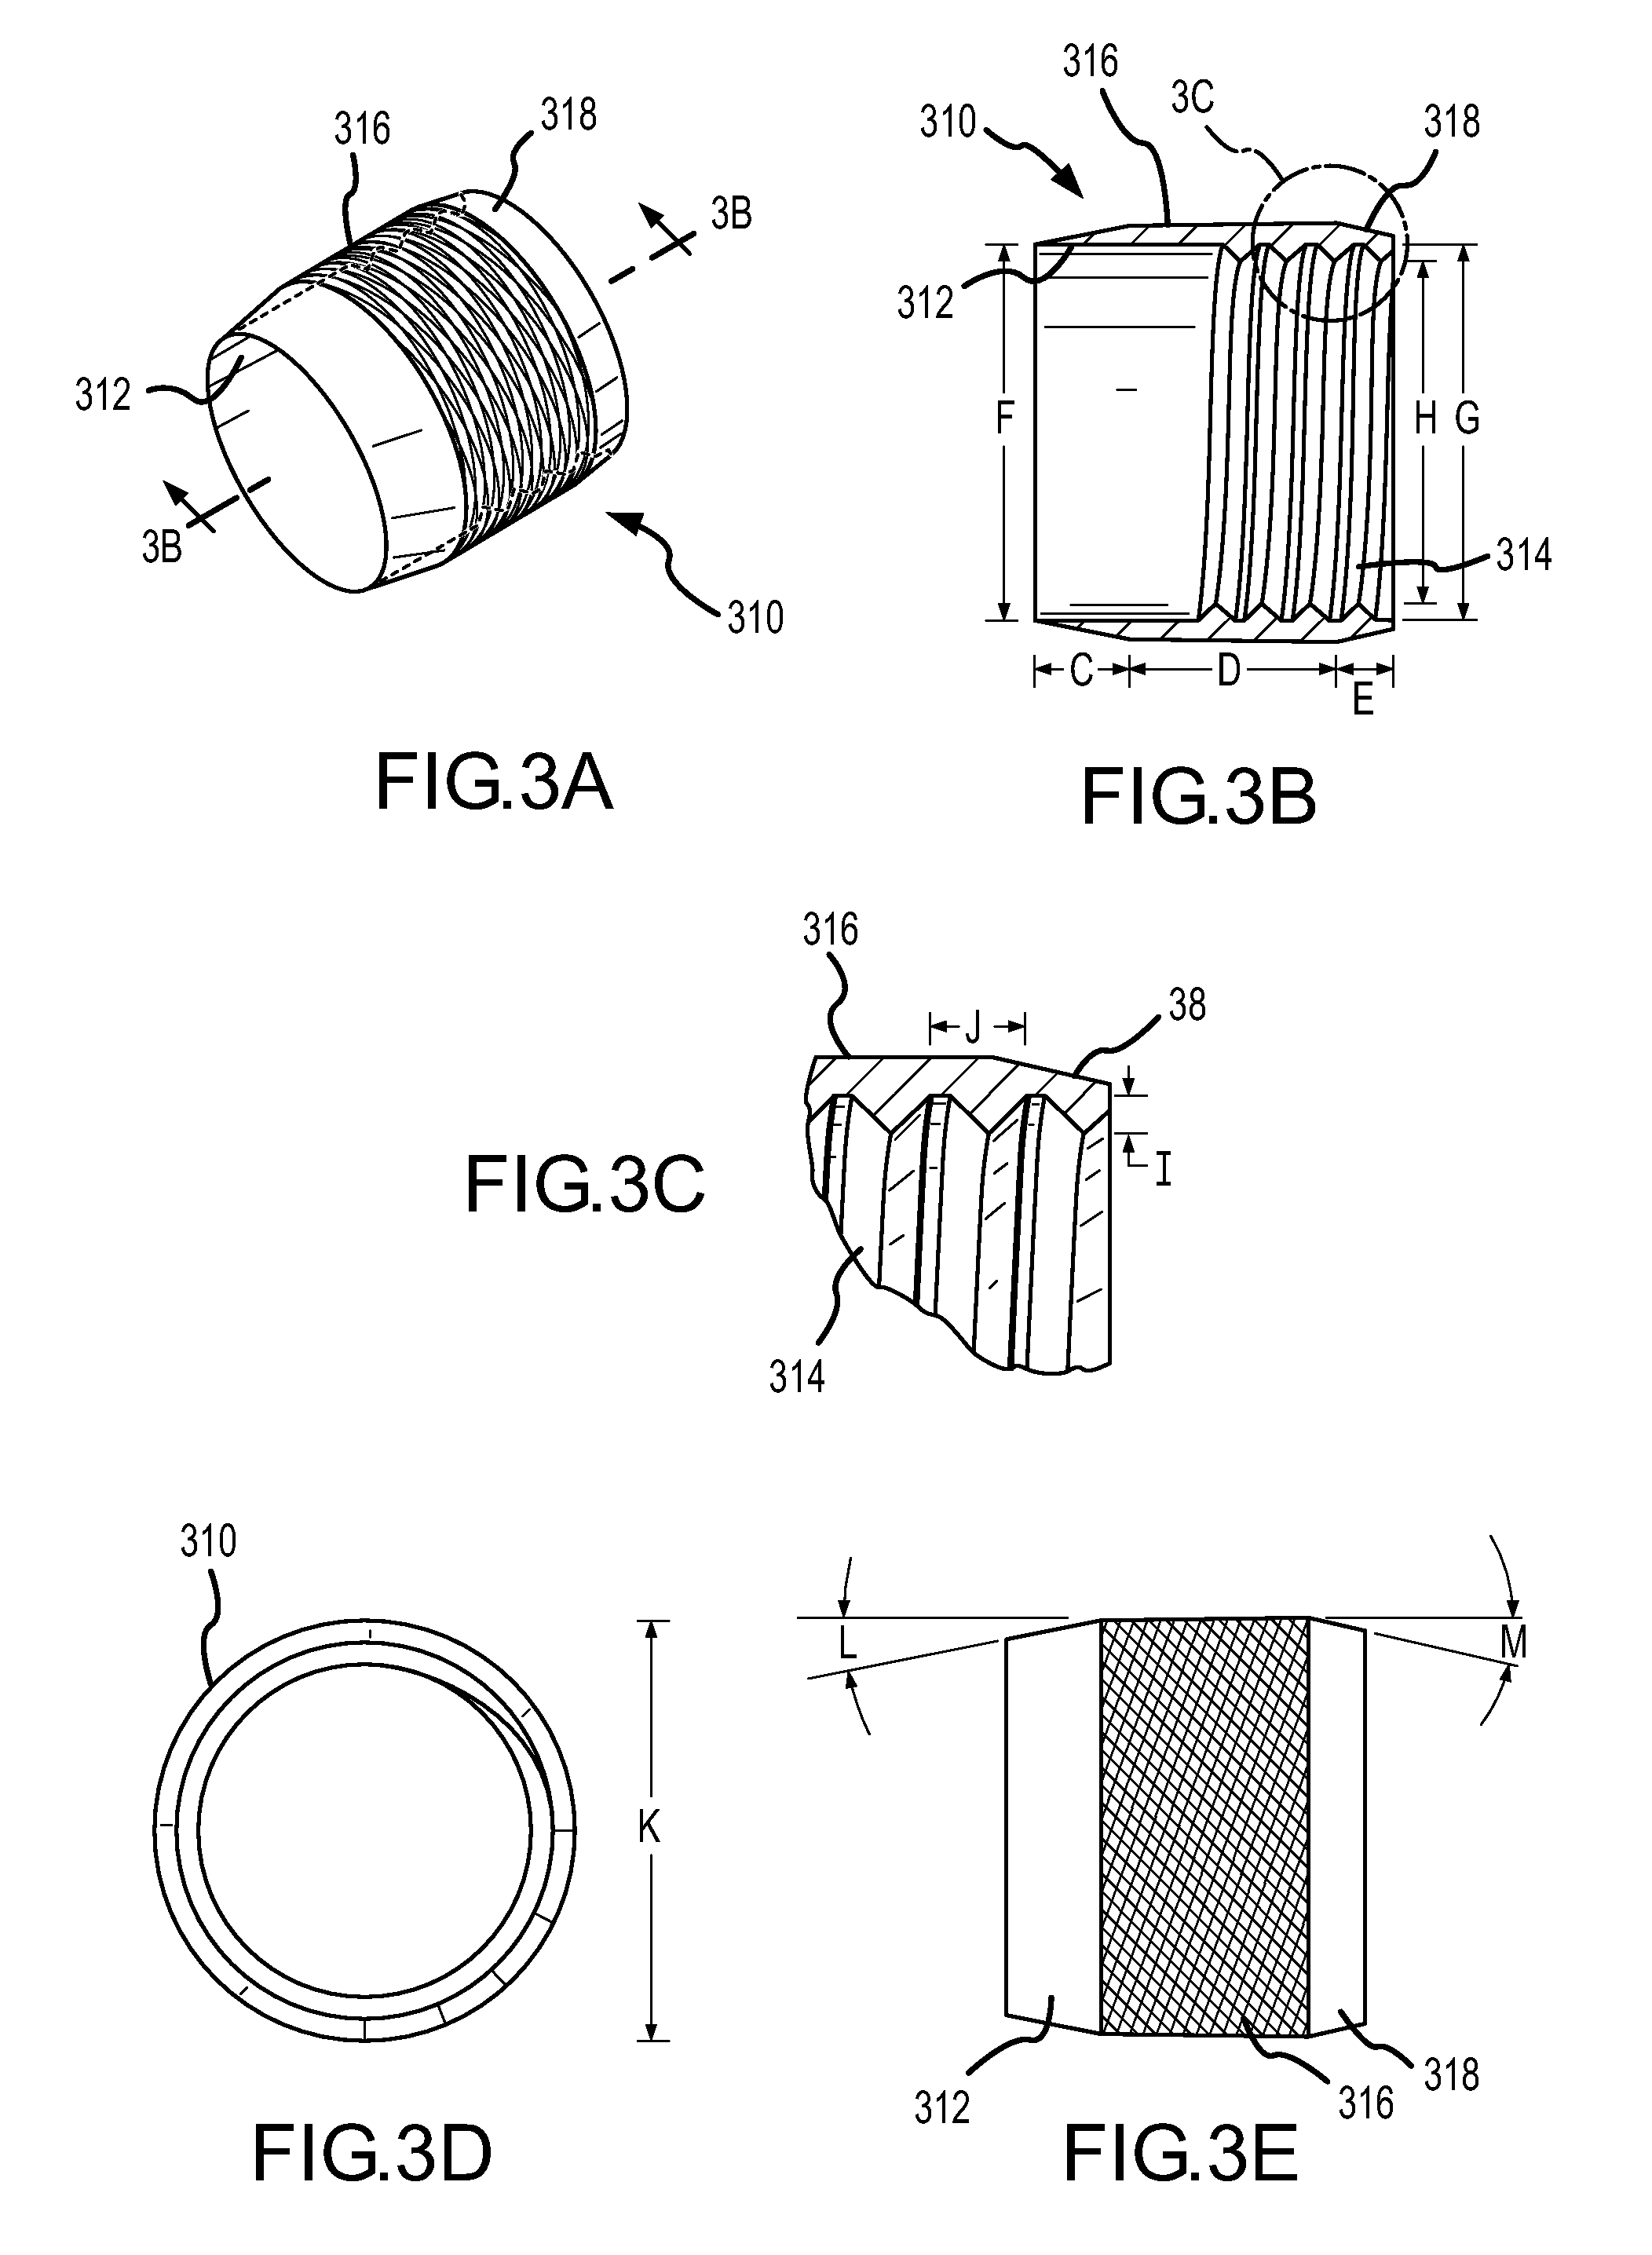 Retractable Separating Systems and Methods